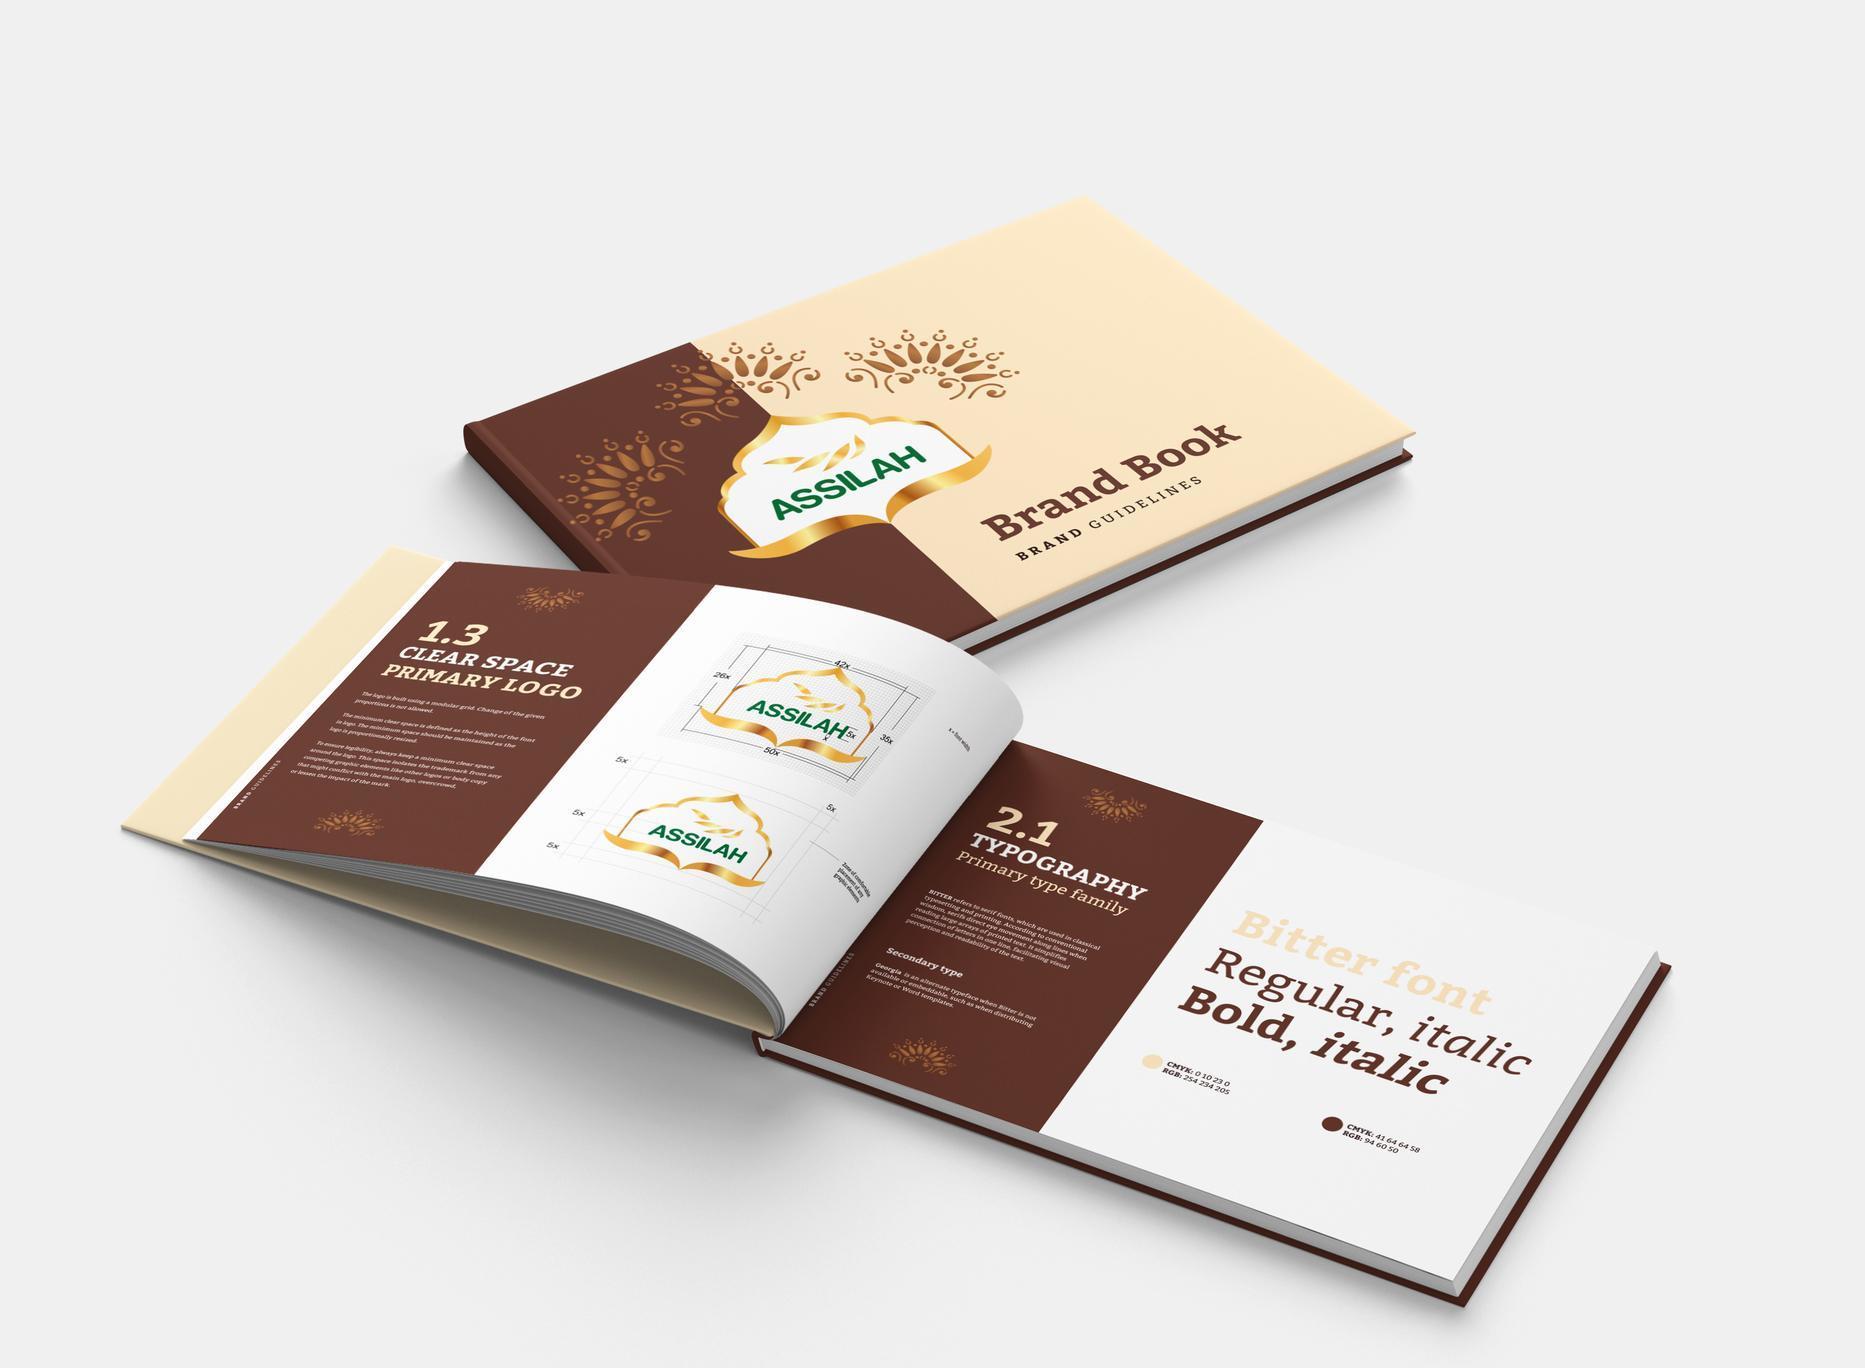 Project: Launching the MHP brand on the Arab market. Identity, brand book — Rubarb - Image - 8